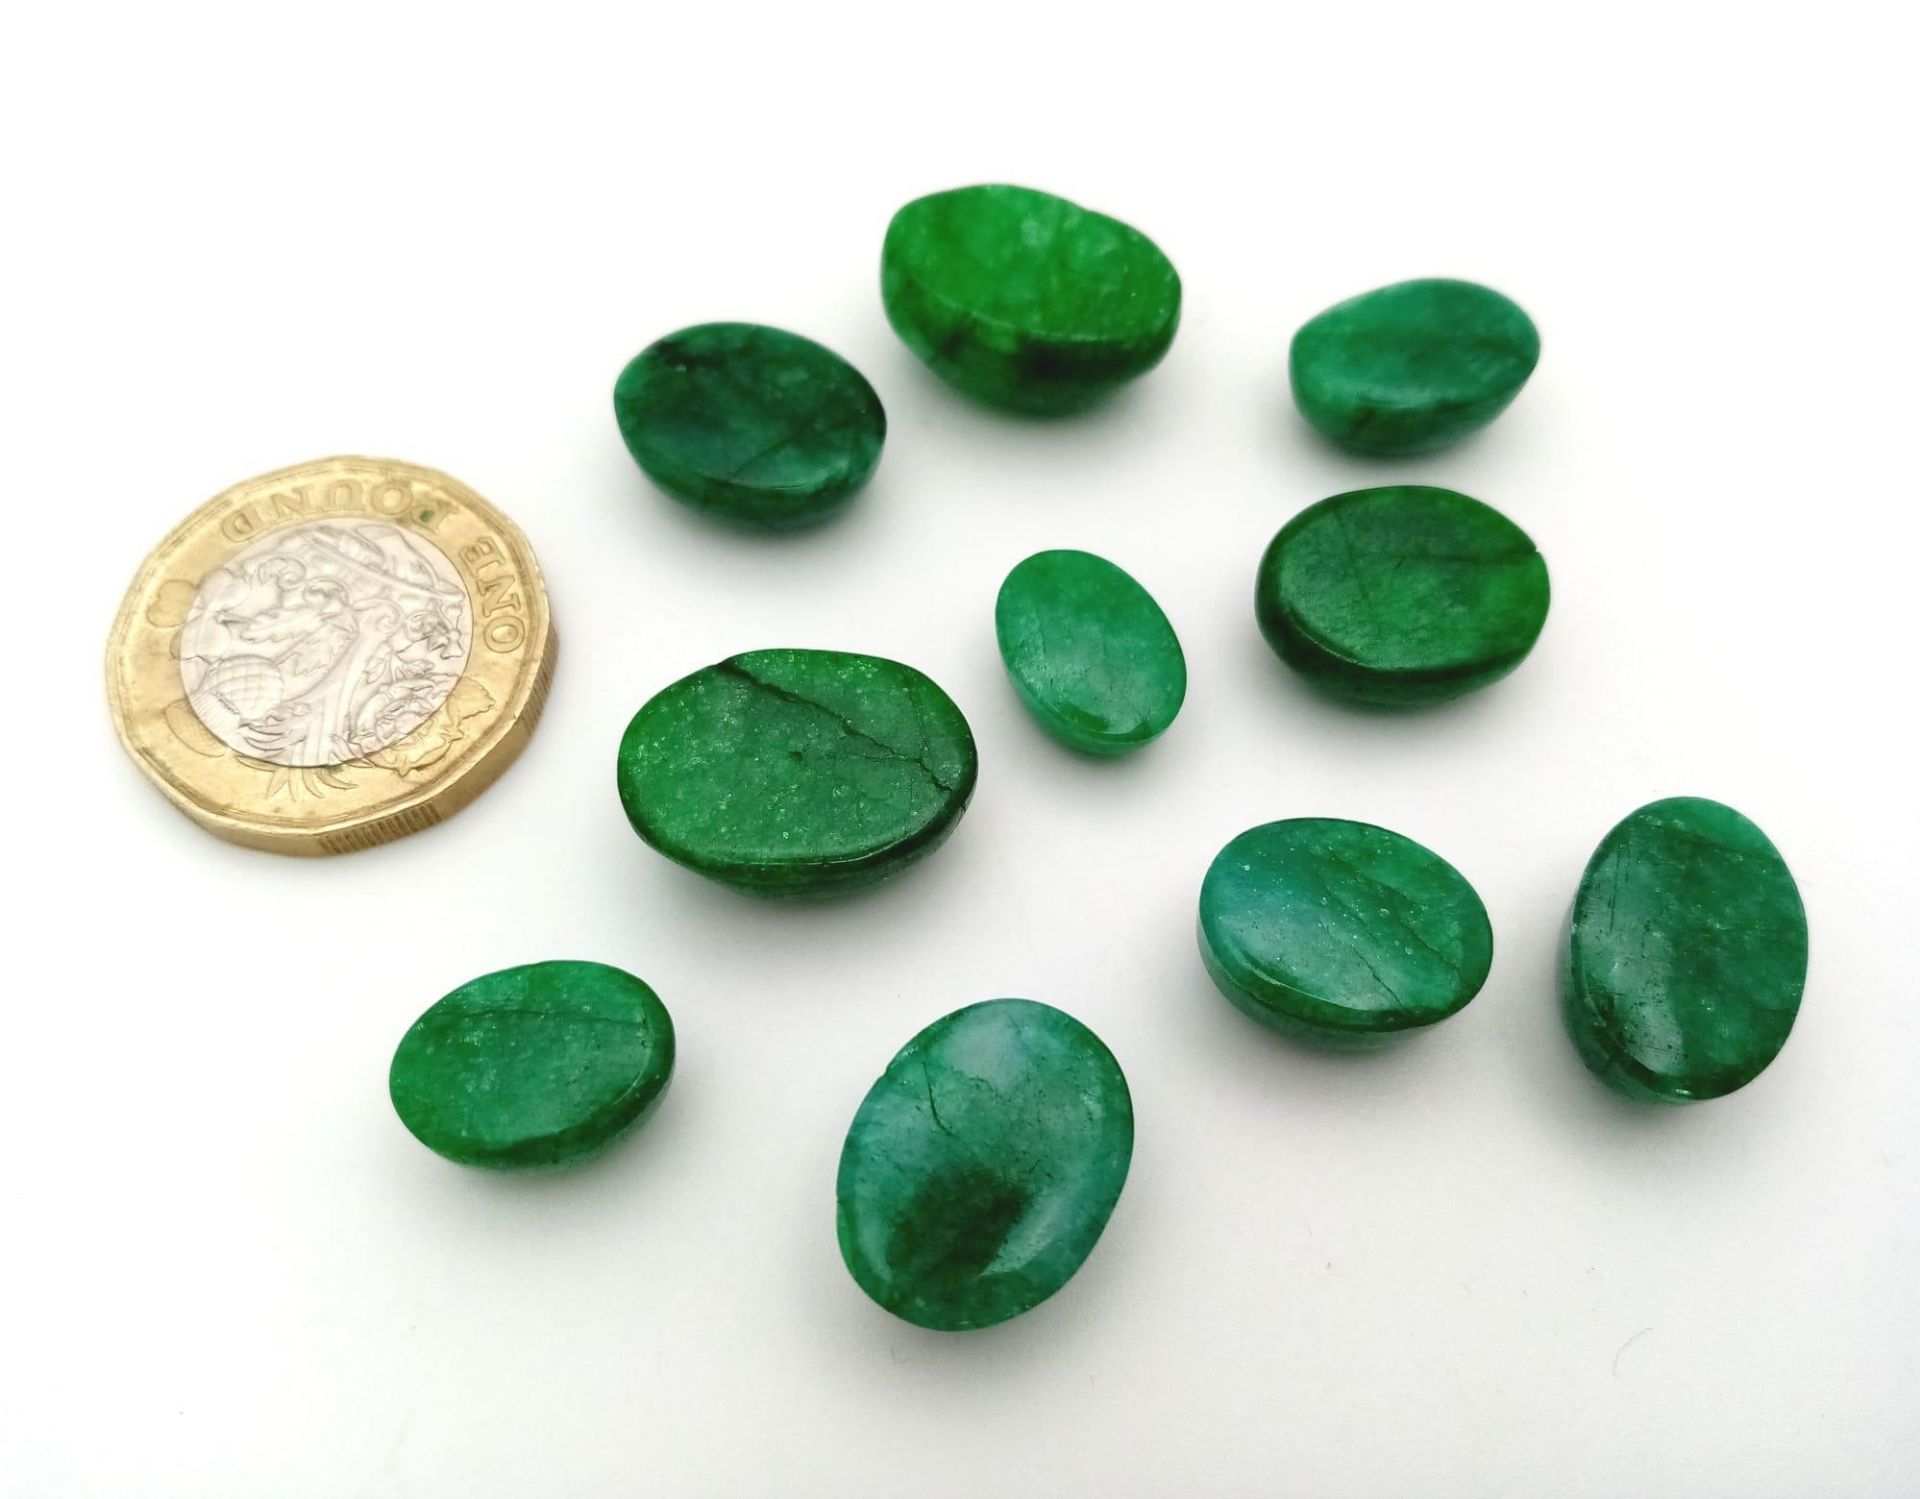 101.45Ct Cabochon, Emerald Gemstones, Lot of 10 Pcs, Oval Shapes - Image 3 of 3